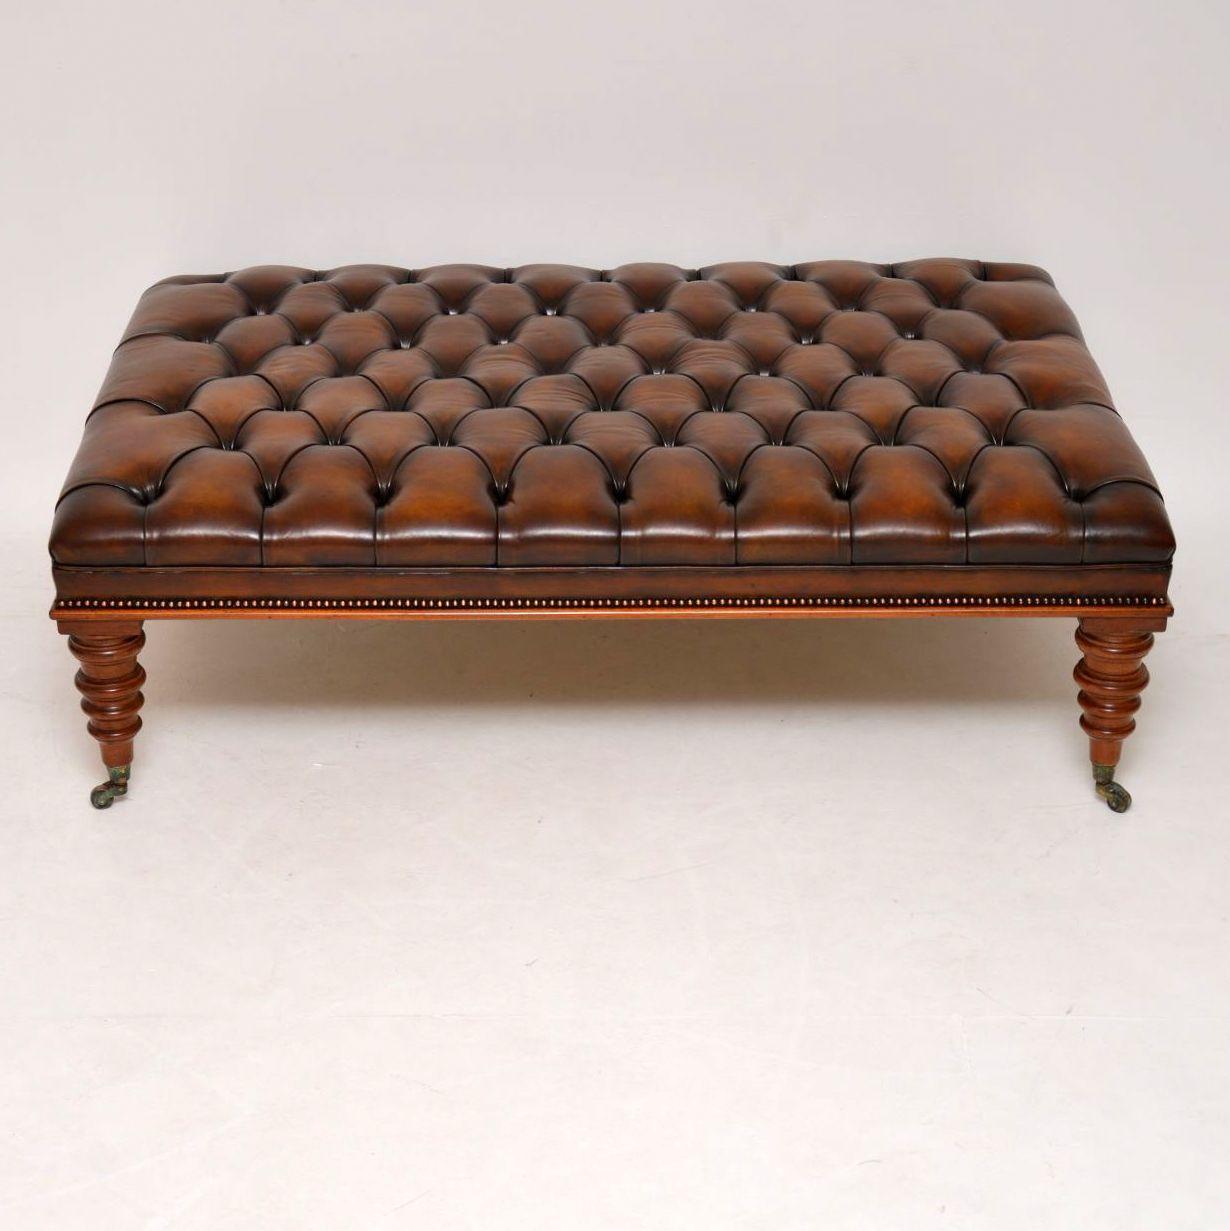 This large antique Victorian style deep buttoned leather stool lends itself to being used as a coffee table too. We have been making these regularly for the last 10 years, normally in this size, but also in other sizes & colors to order. They are